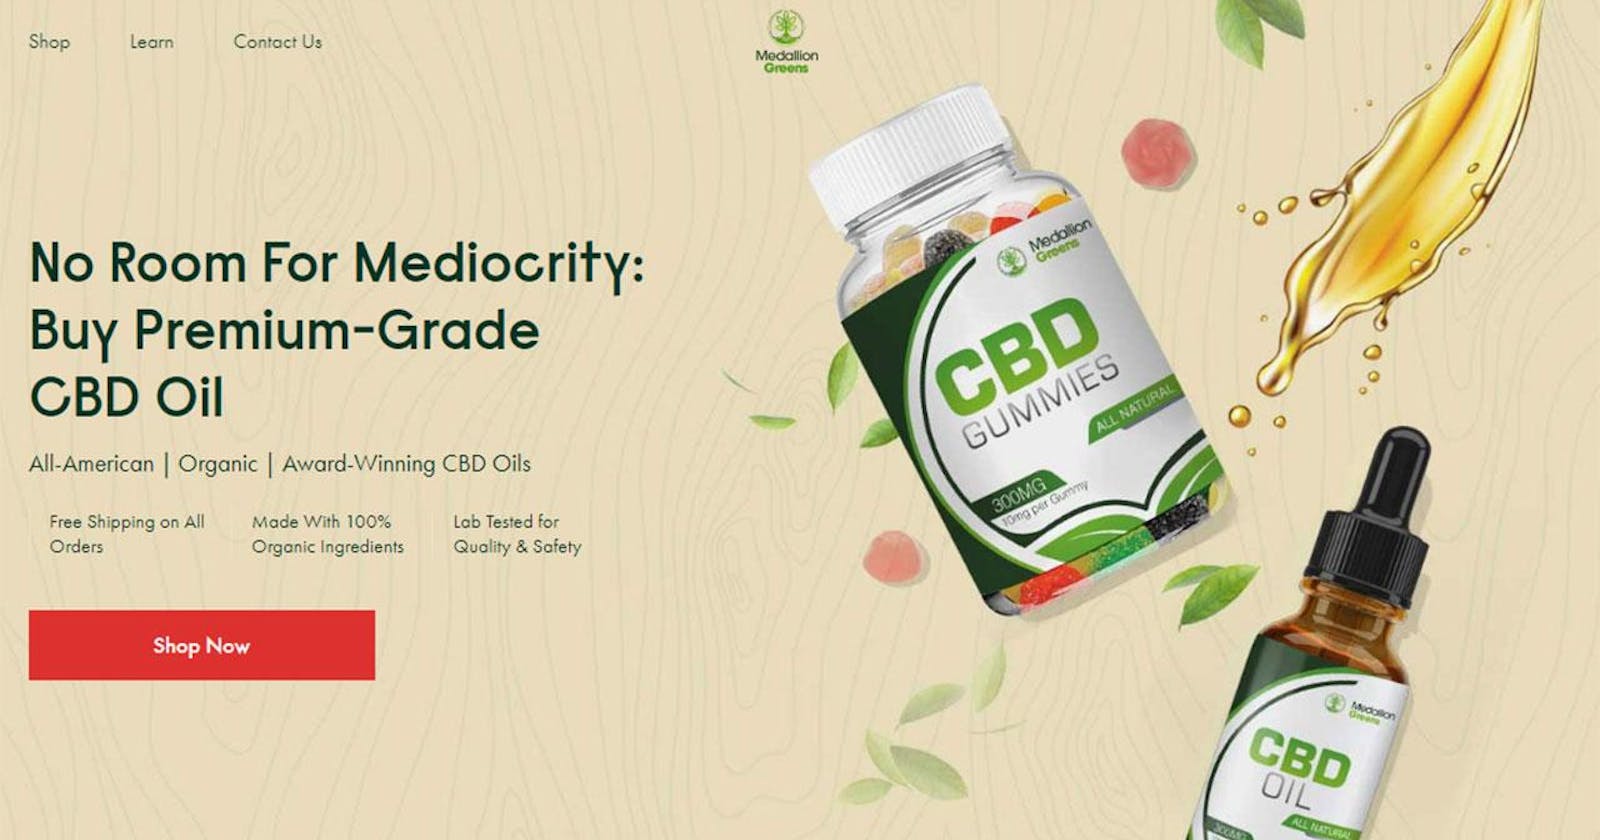 Medallion Greens CBD Gummies Reviews - Is it legit or Does it Really Work , What To Know Before Using It??